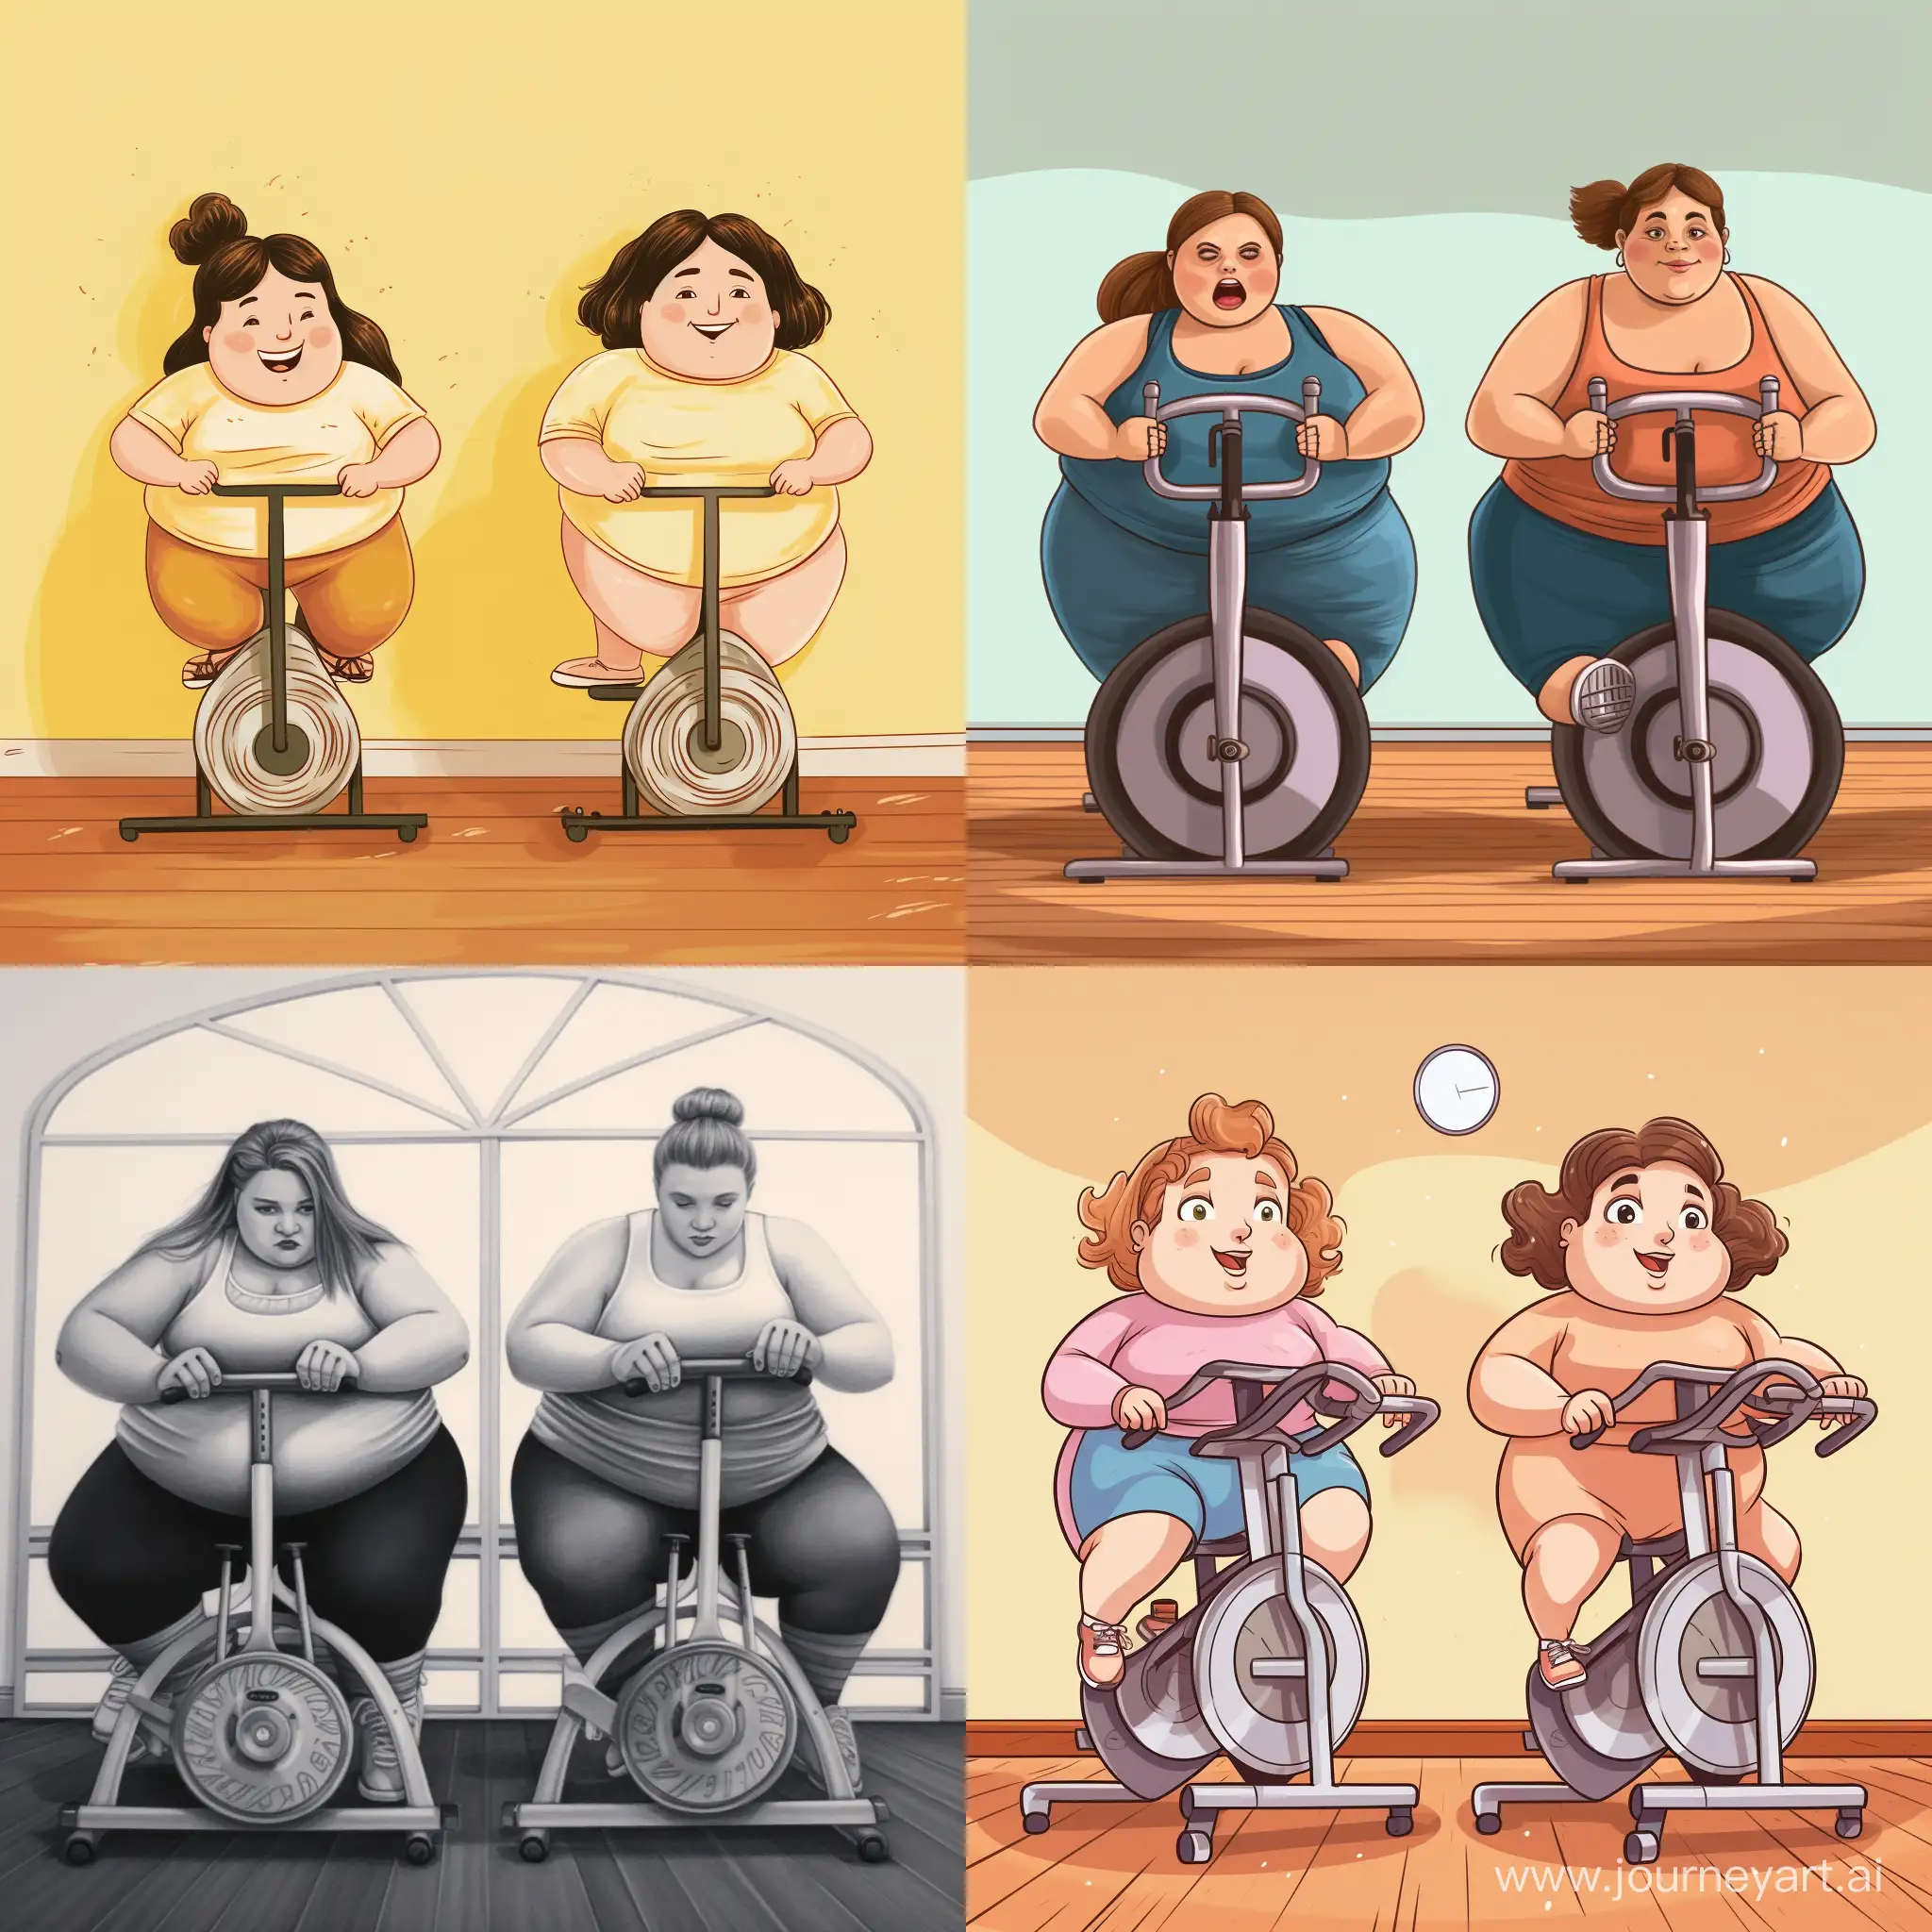 Identical-Twins-Weight-Loss-Journey-Dreaming-and-Exercising-Side-by-Side